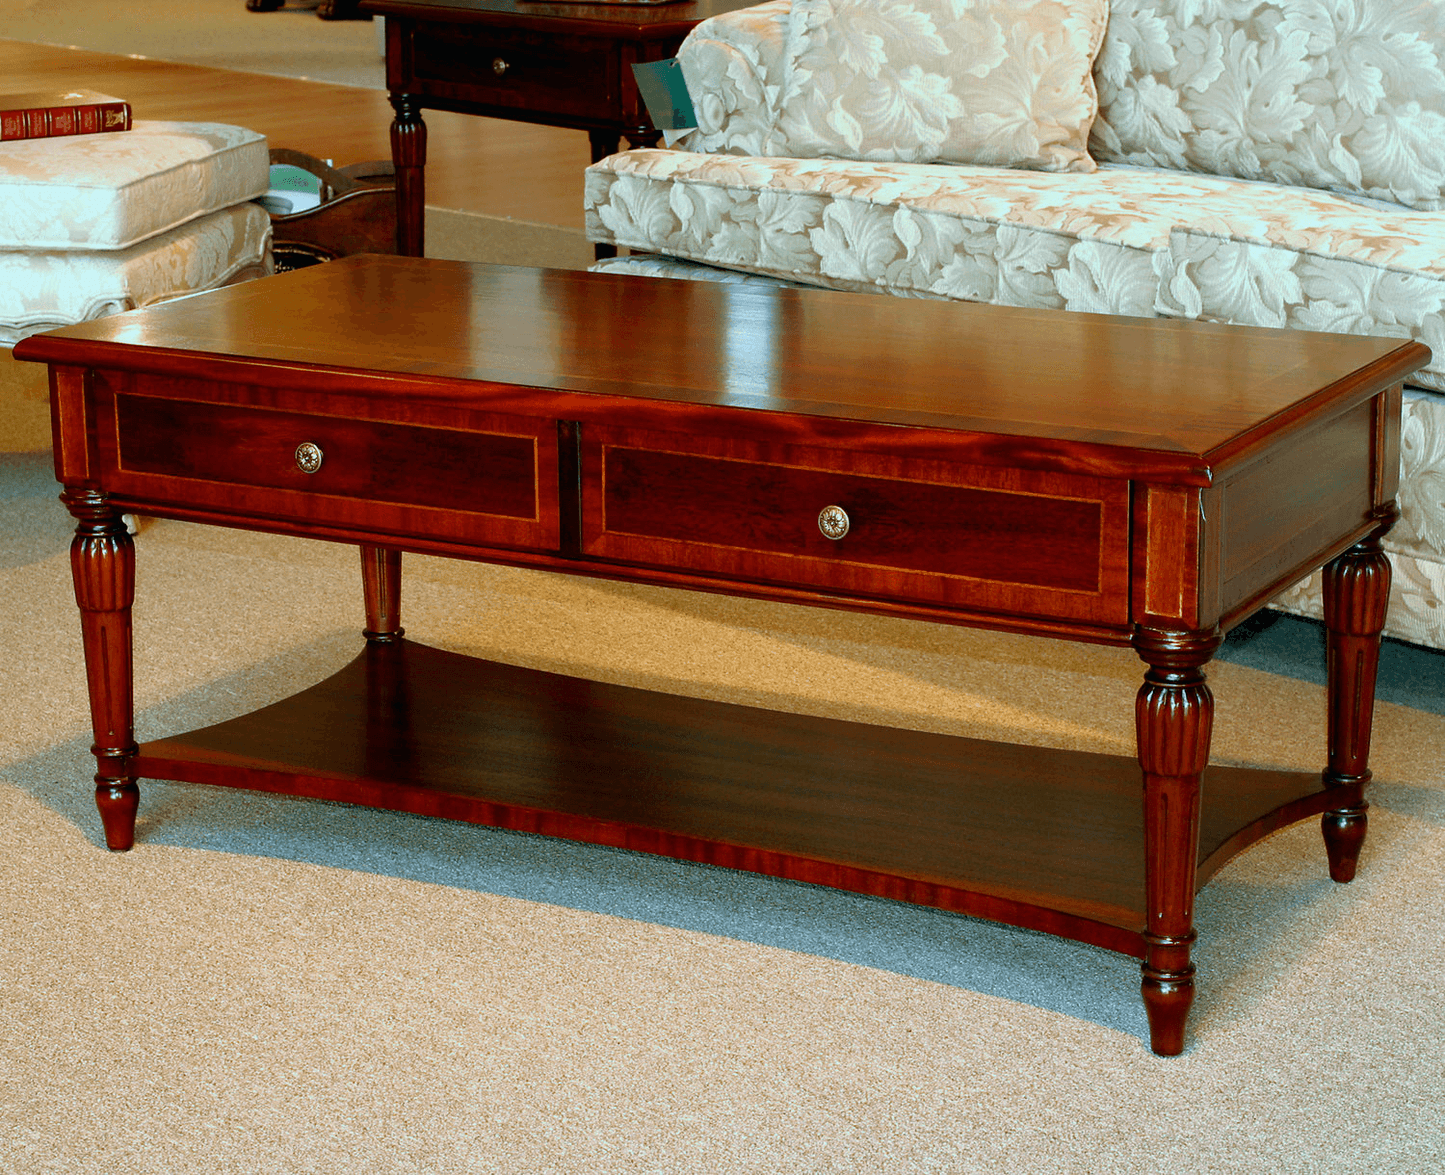 RECTANGULAR LOUIS XVI COFFEE TABLE WITH BEADED EDGE - House of Chippendale